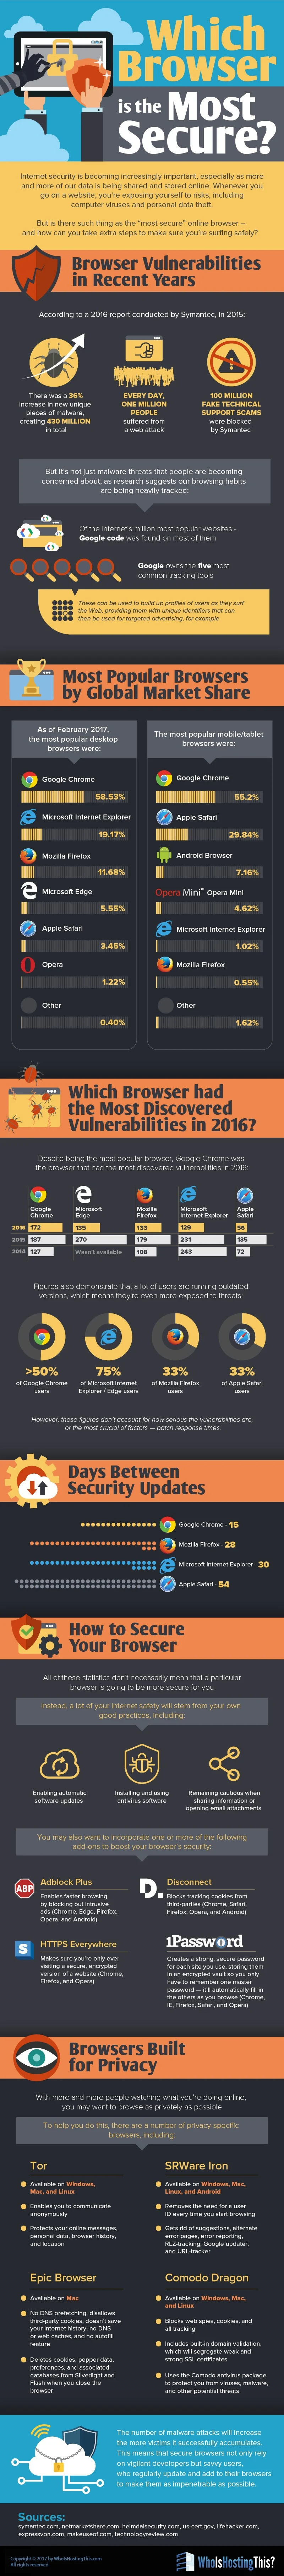 Which Browser is Most Secure? [Infographic]